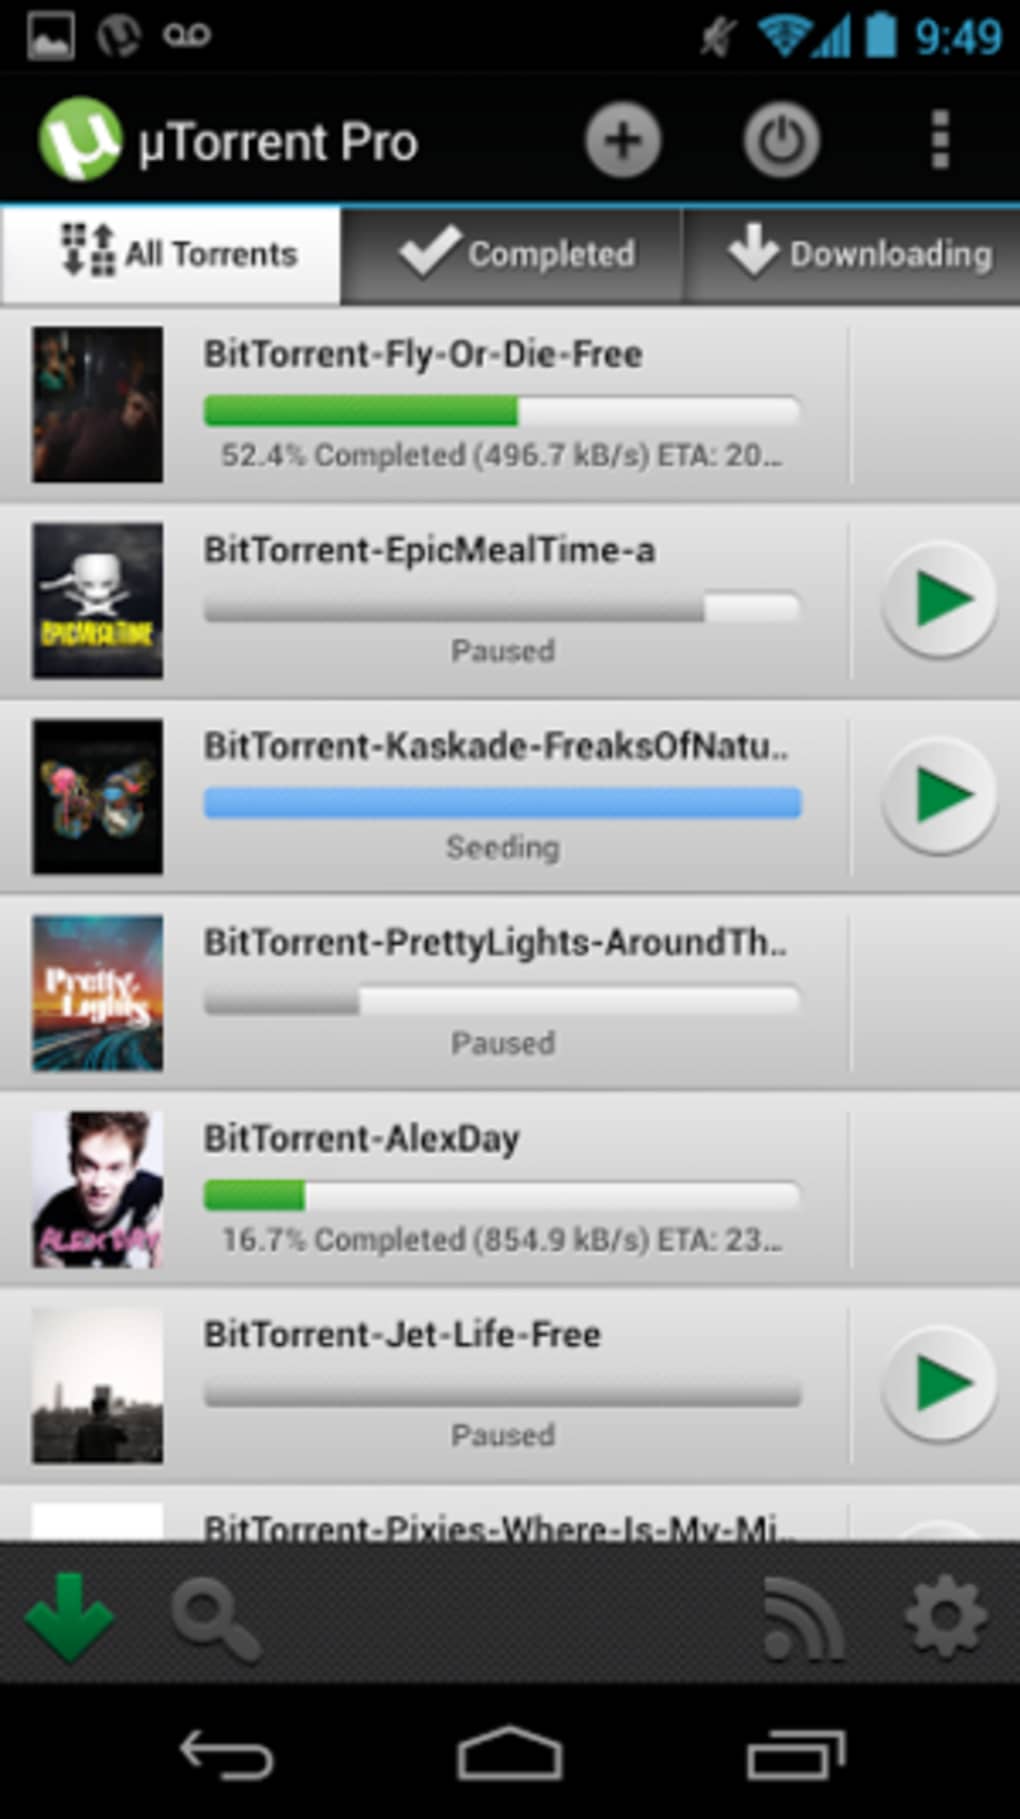 utorrent pro app free download for android